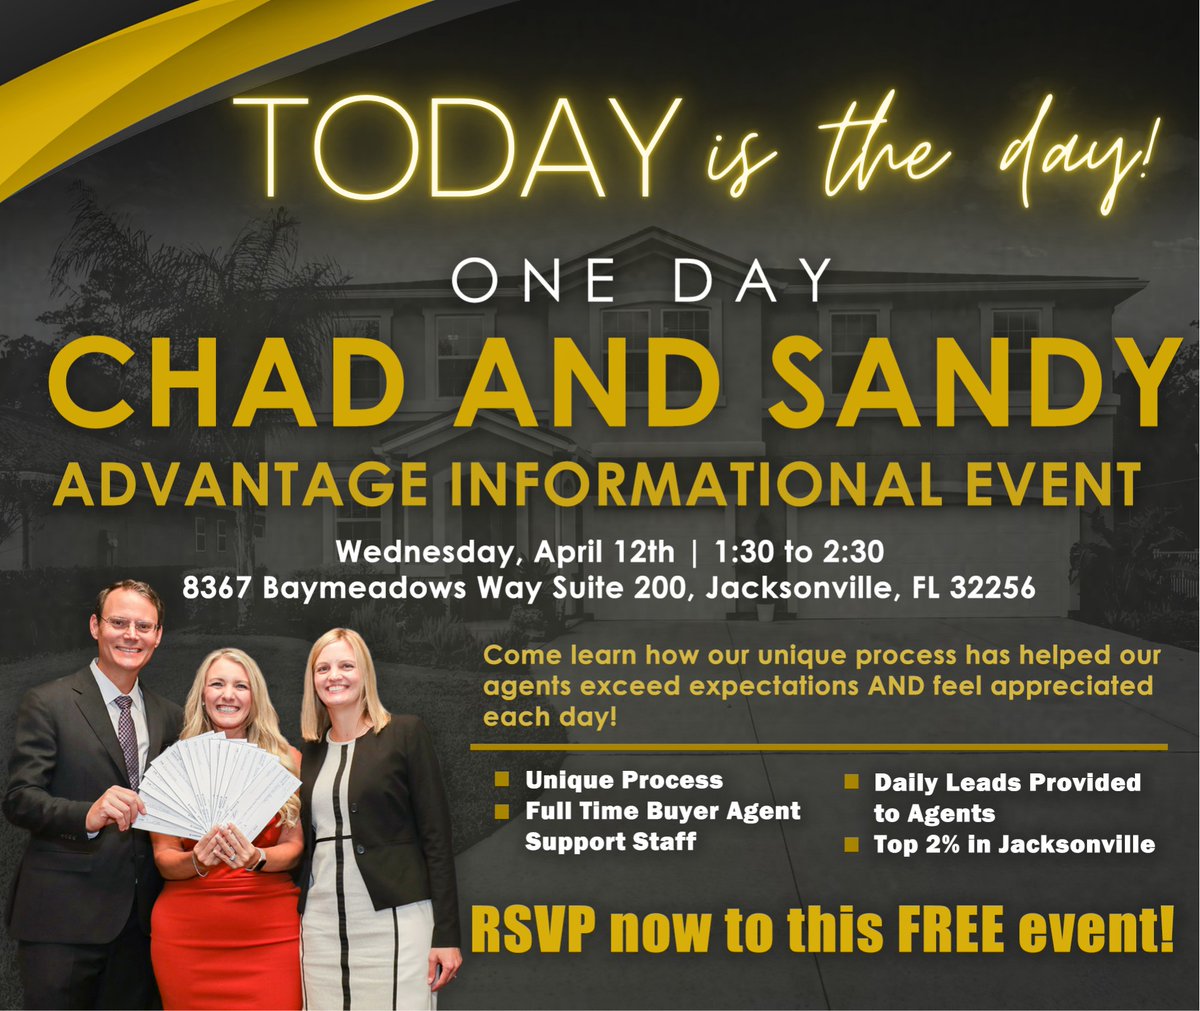 WE are HIRING ! ! TODAY is the Day! #Realtor #RealEstate #BuyerSpecialists #ChadandSandy #CSREG #Jacksonville #BestAgents #JobSearch #RealtorJobs #RealEstateJobs #Recruiting #Hiring #HotJob #HiringNow #JobSearch #Happy #ApplyNow #ListingAgents